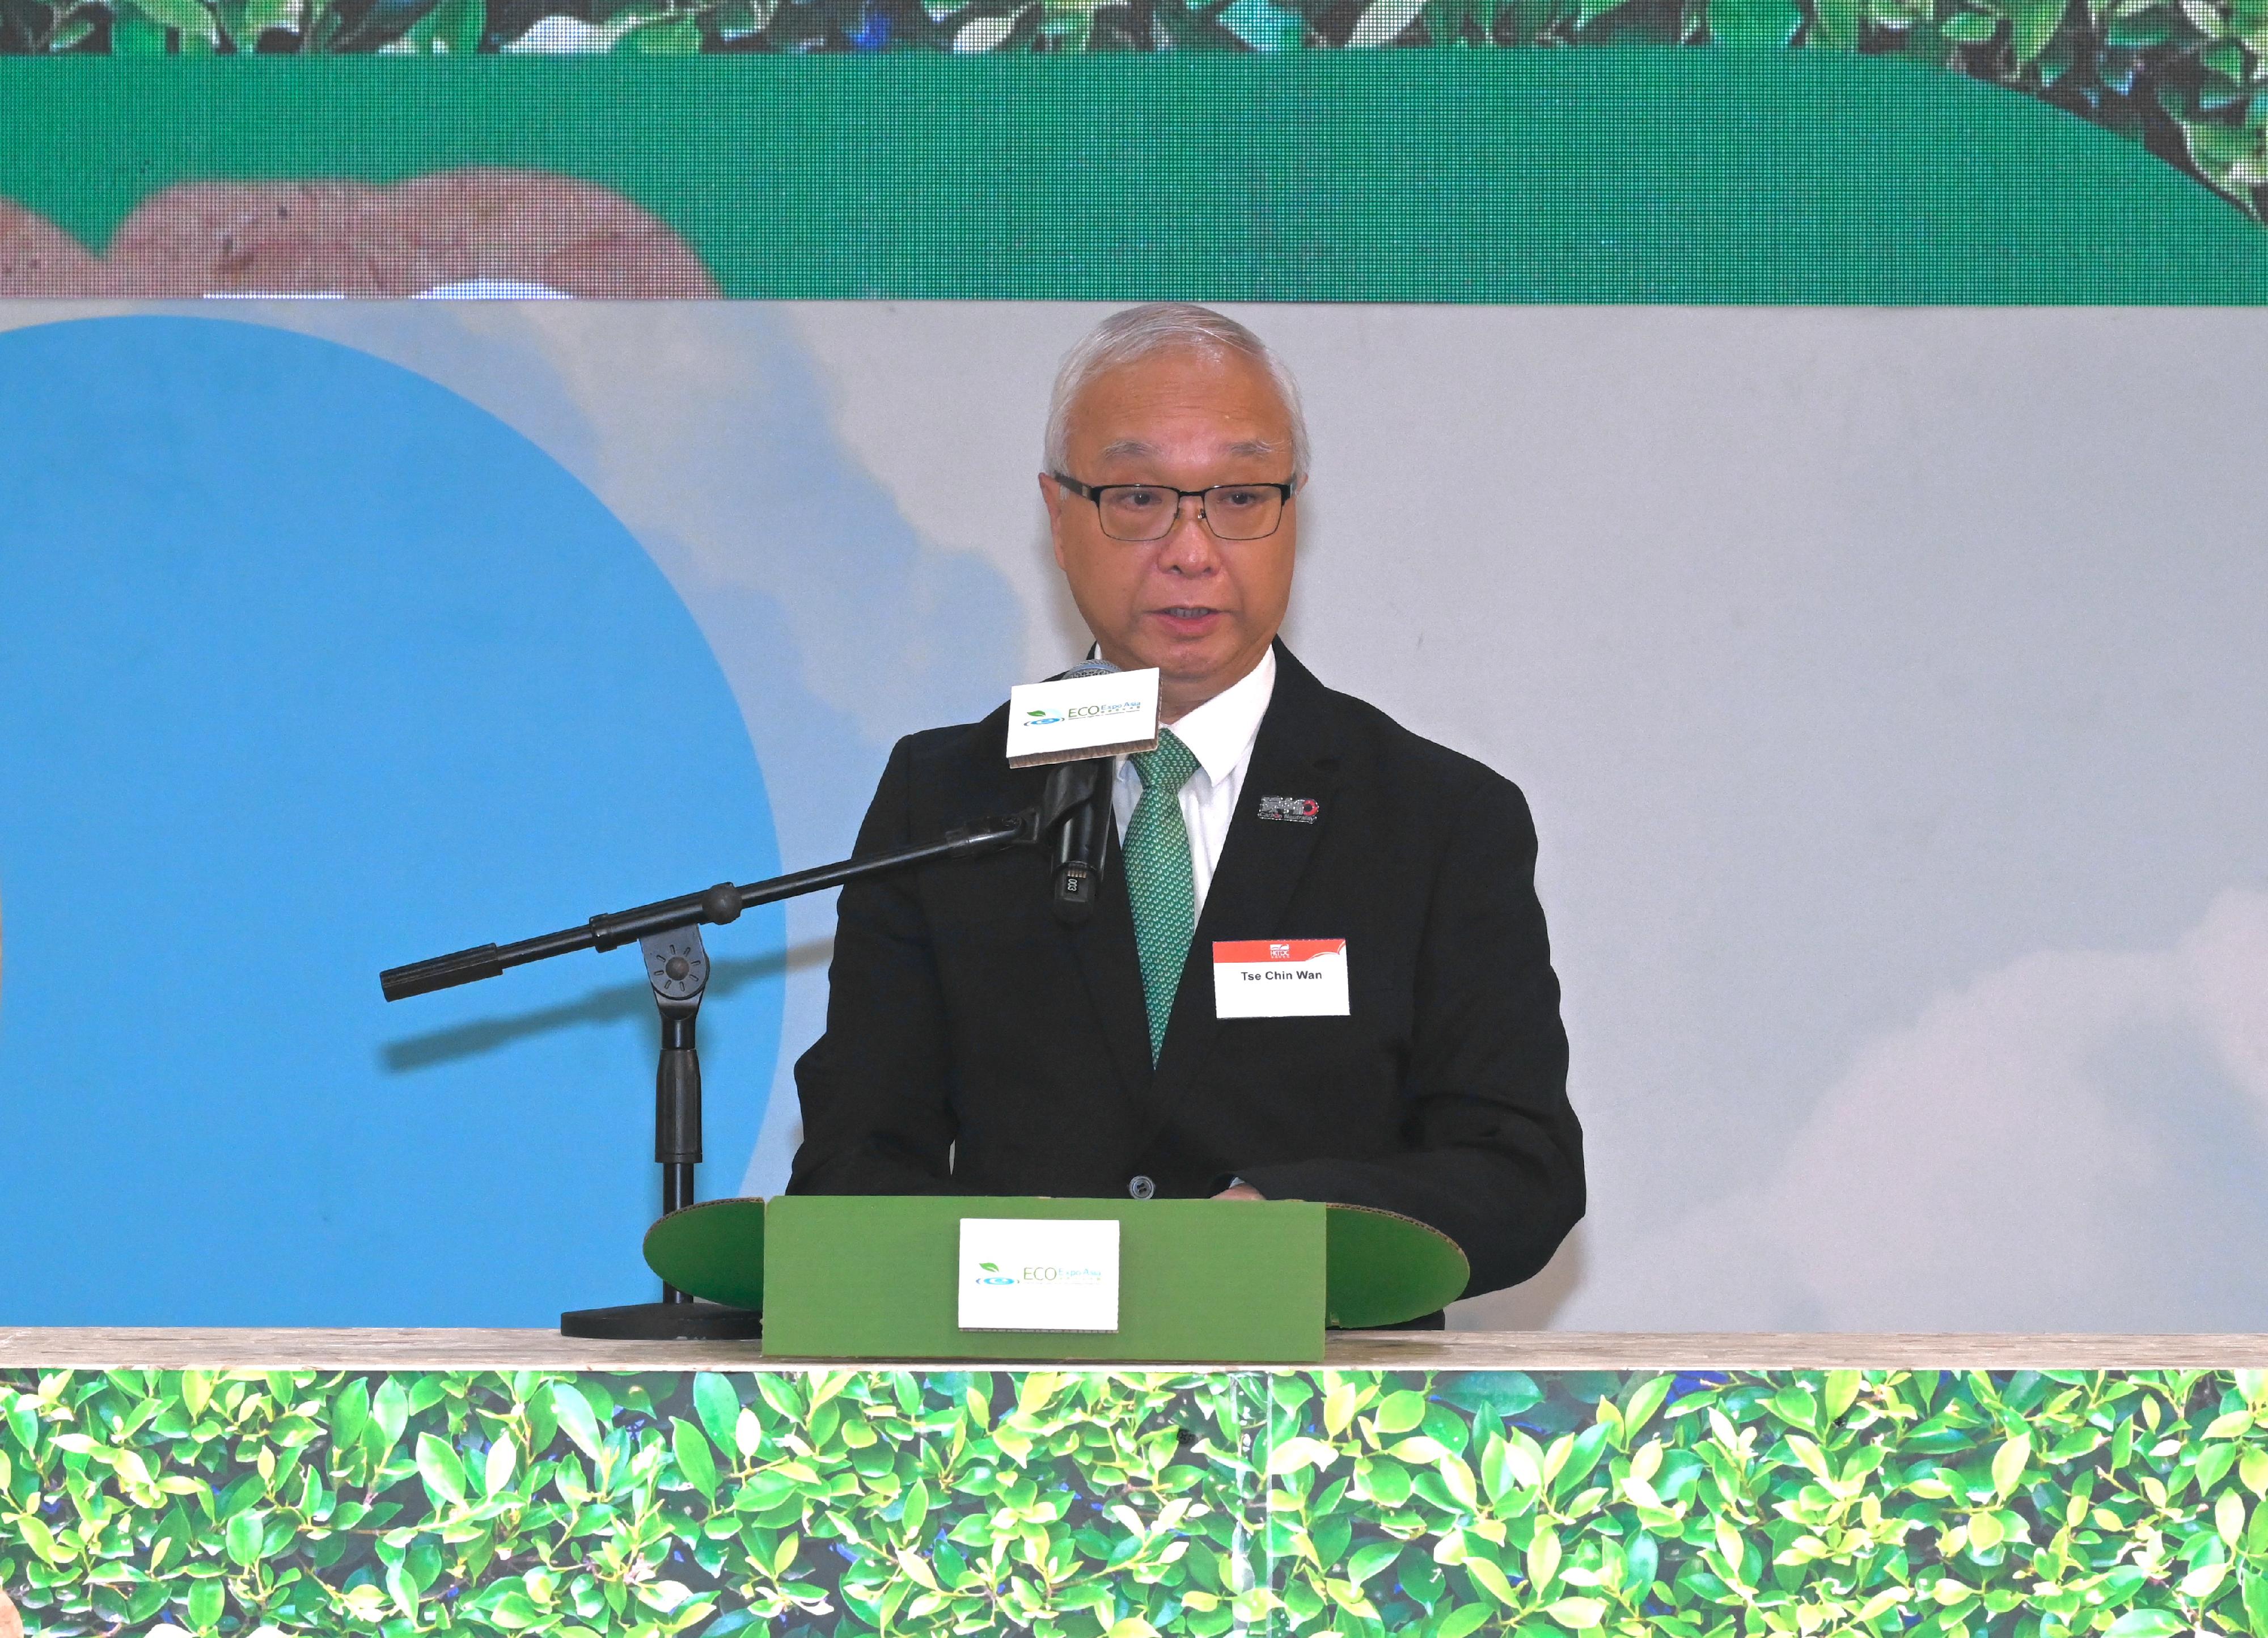 The Secretary for Environment and Ecology, Mr Tse Chin-wan, speaks at the opening ceremony of the 18th Eco Expo Asia today (October 26).